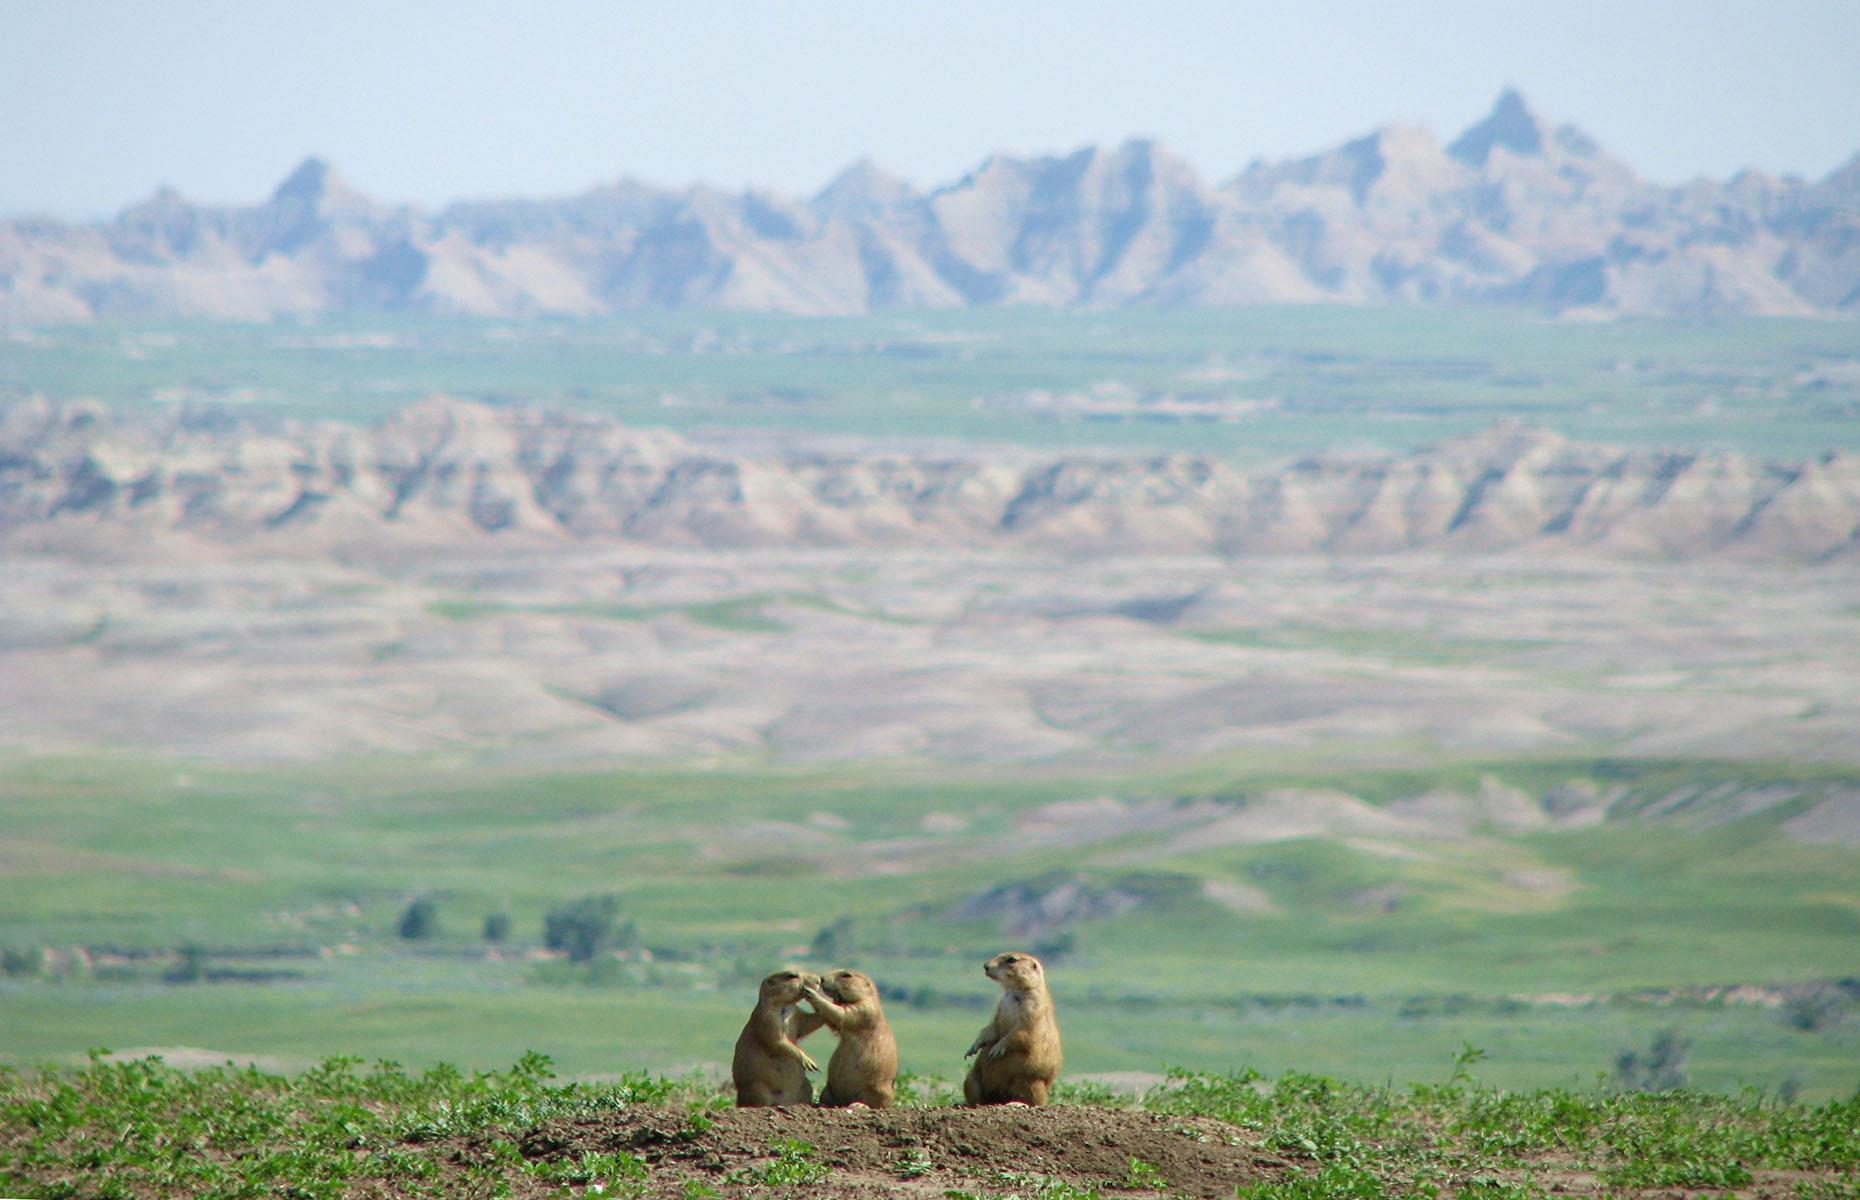 <p>It's home to a variety of native wildlife, including a large colony of prairie dogs. At <a href="https://www.badlandsranchstore.com/about%20us.htm">the Badlands Ranch Store</a> you can buy peanuts and feed the furry rodents, but to see them in a wilder and more natural setting, take a five-mile detour down the bumpy track from Sage Creek Rim Road to Prairie Dog Town.</p>  <p>Sit back and watch as hundreds as the champion diggers scurry about in the grasslands, popping in and out of their maze of holes.</p>